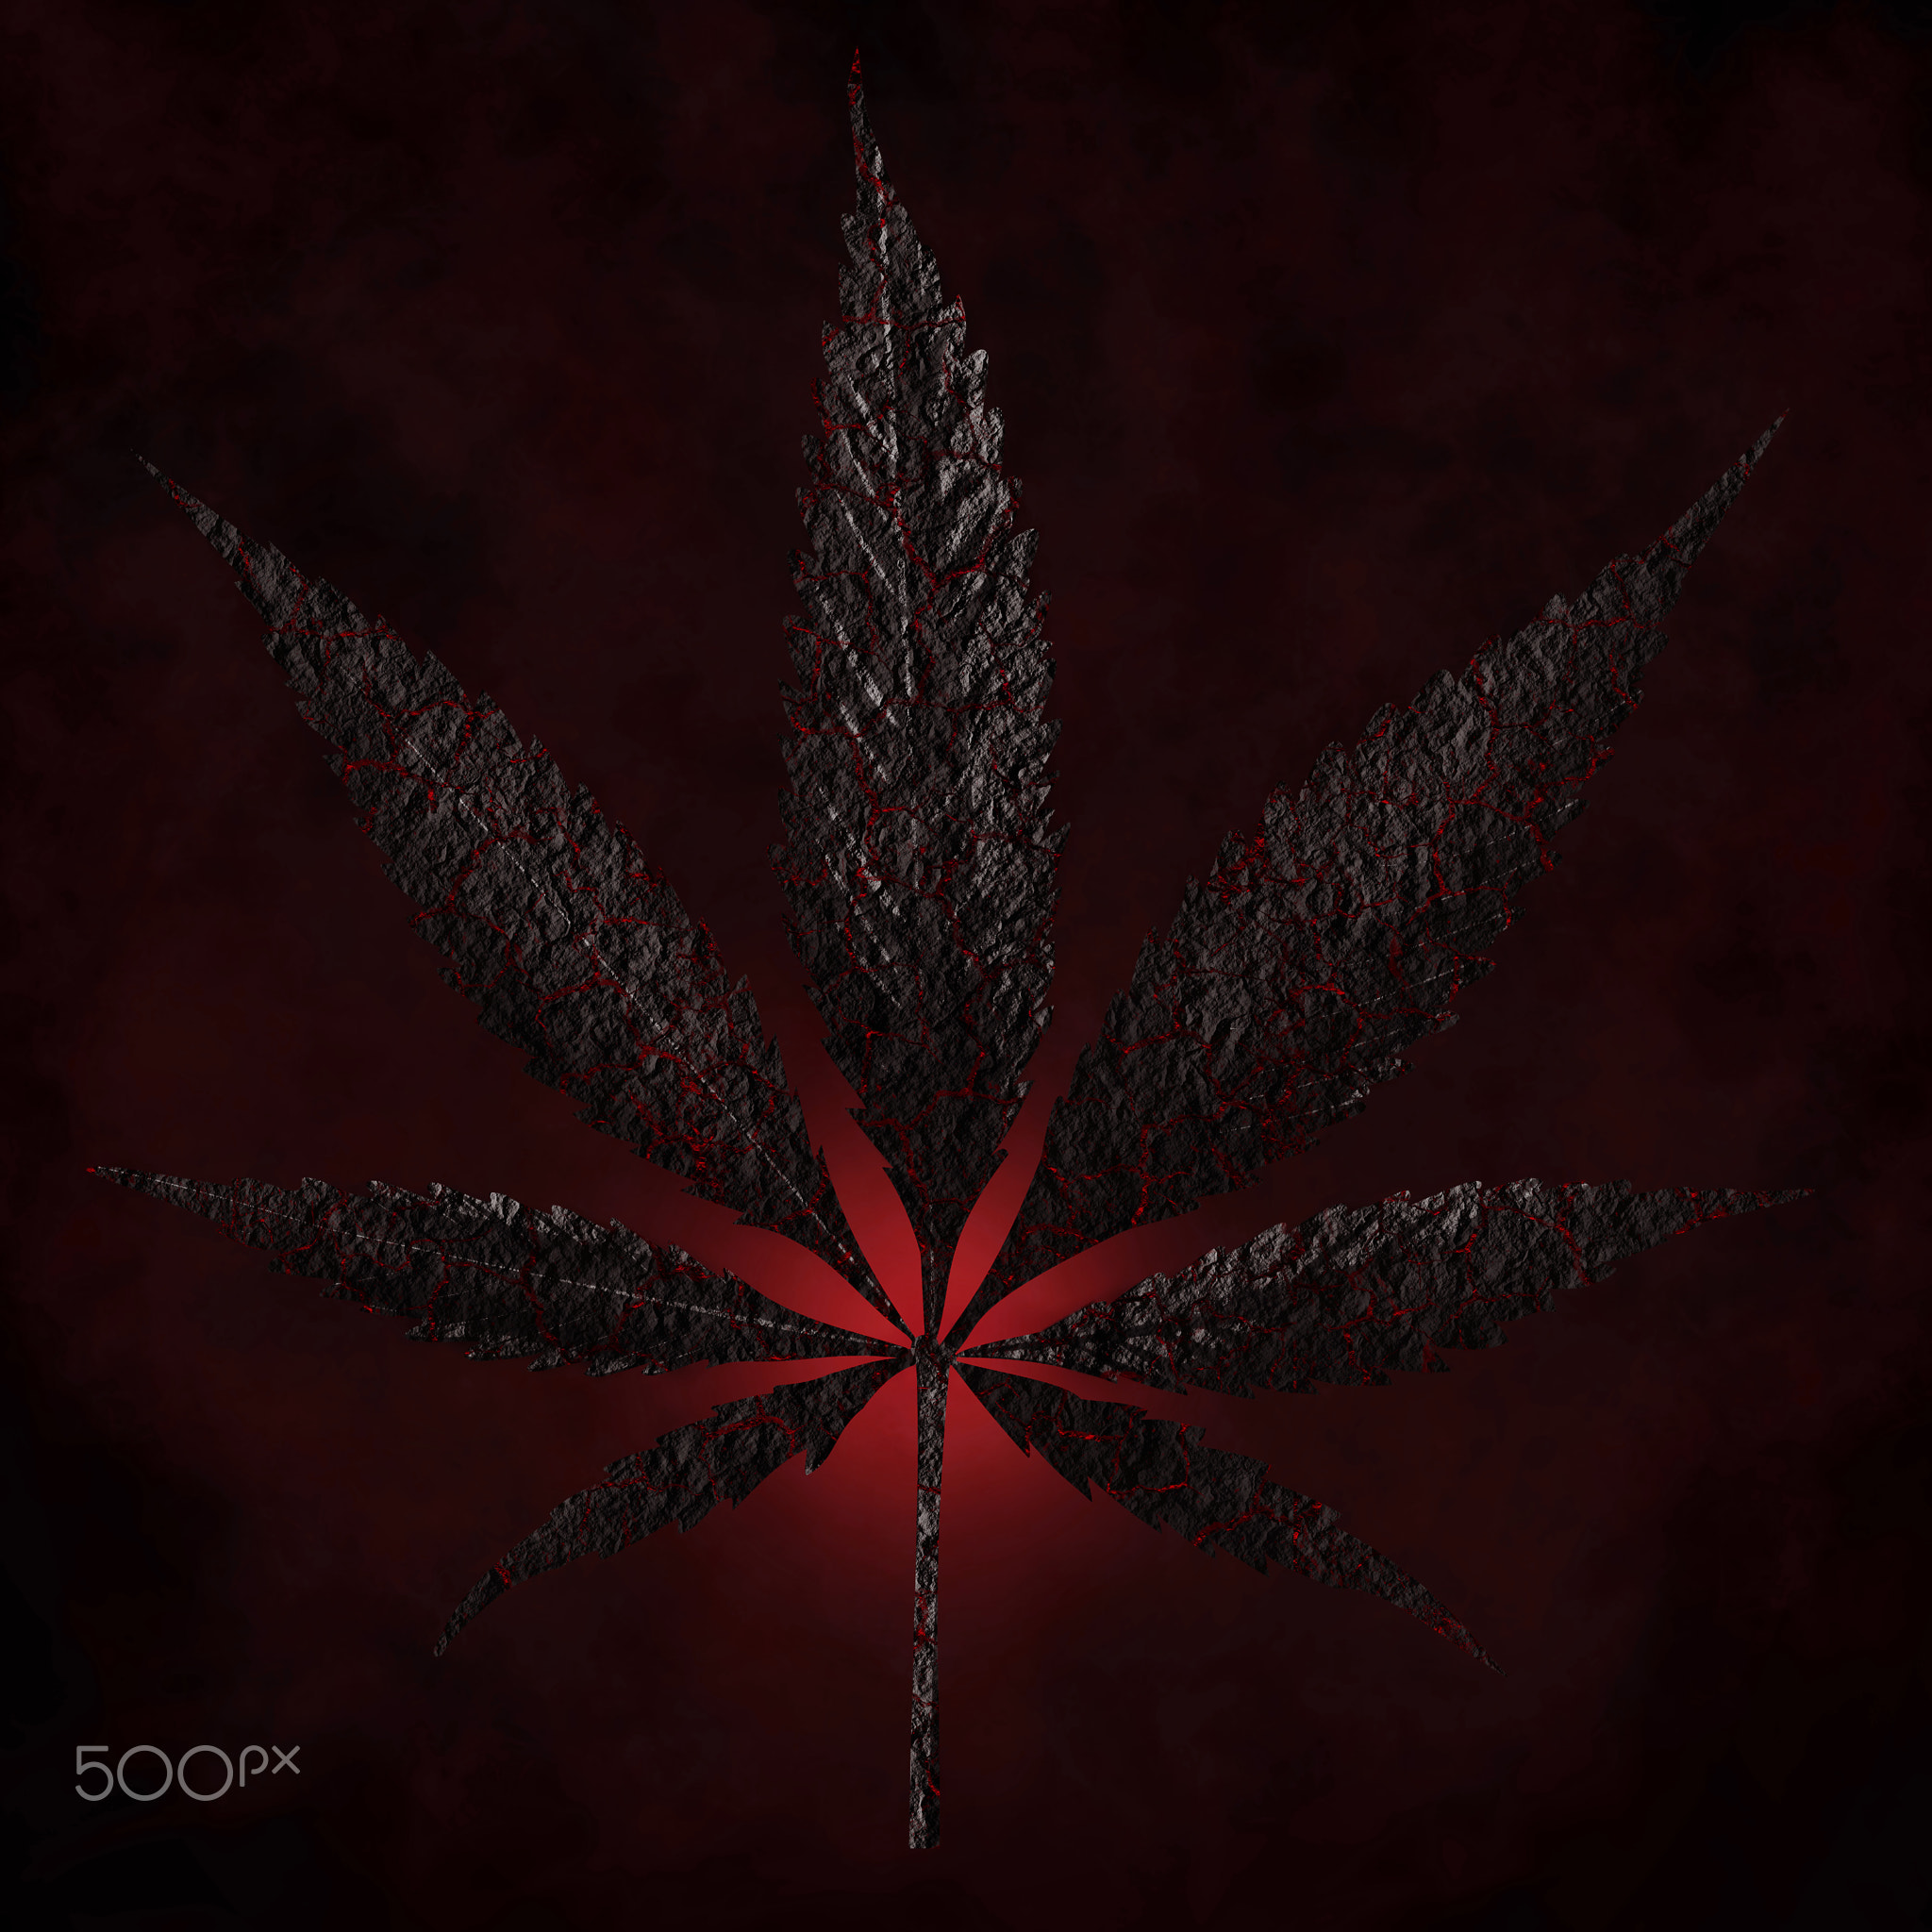 burnt charred cannabis leaves isolated on dark red background Growing